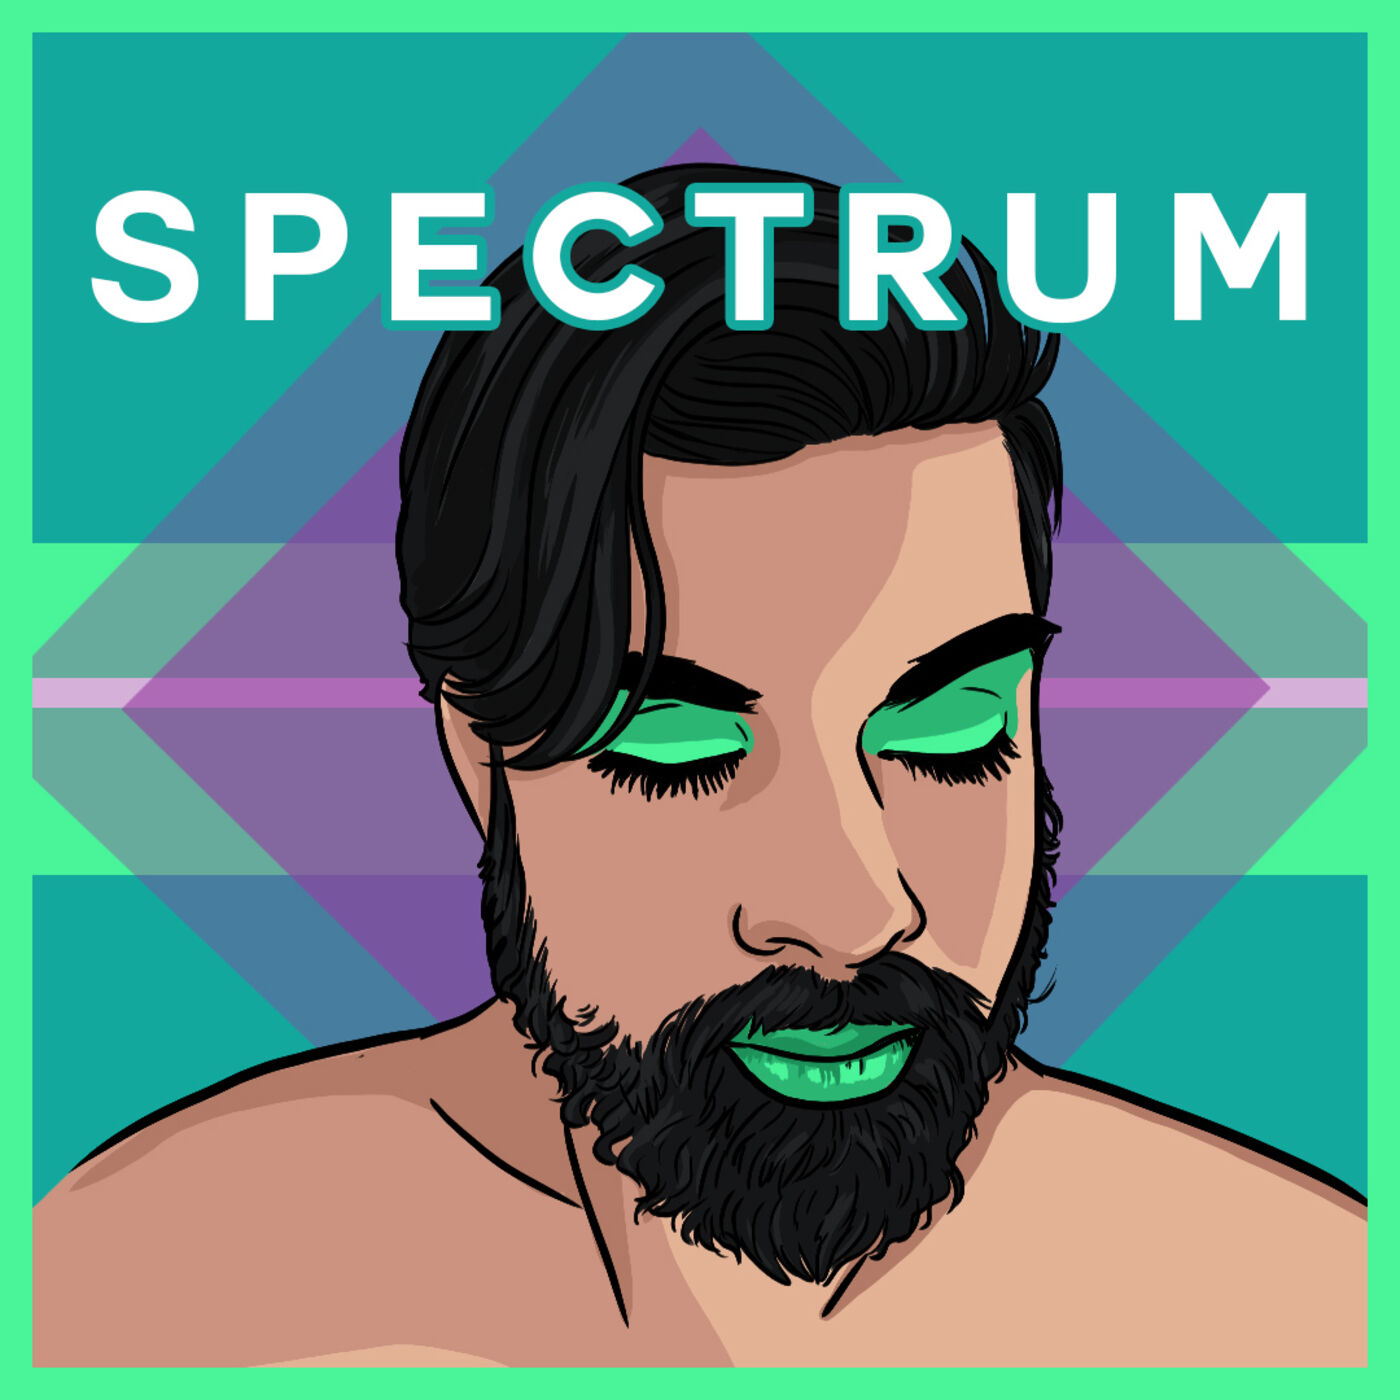 Image of a bearded human being with closed eyes, wearing green eyeshadow and lipstick against a colorful blue, purple and green backdrop with the word 'Spectrum' in white letters on top